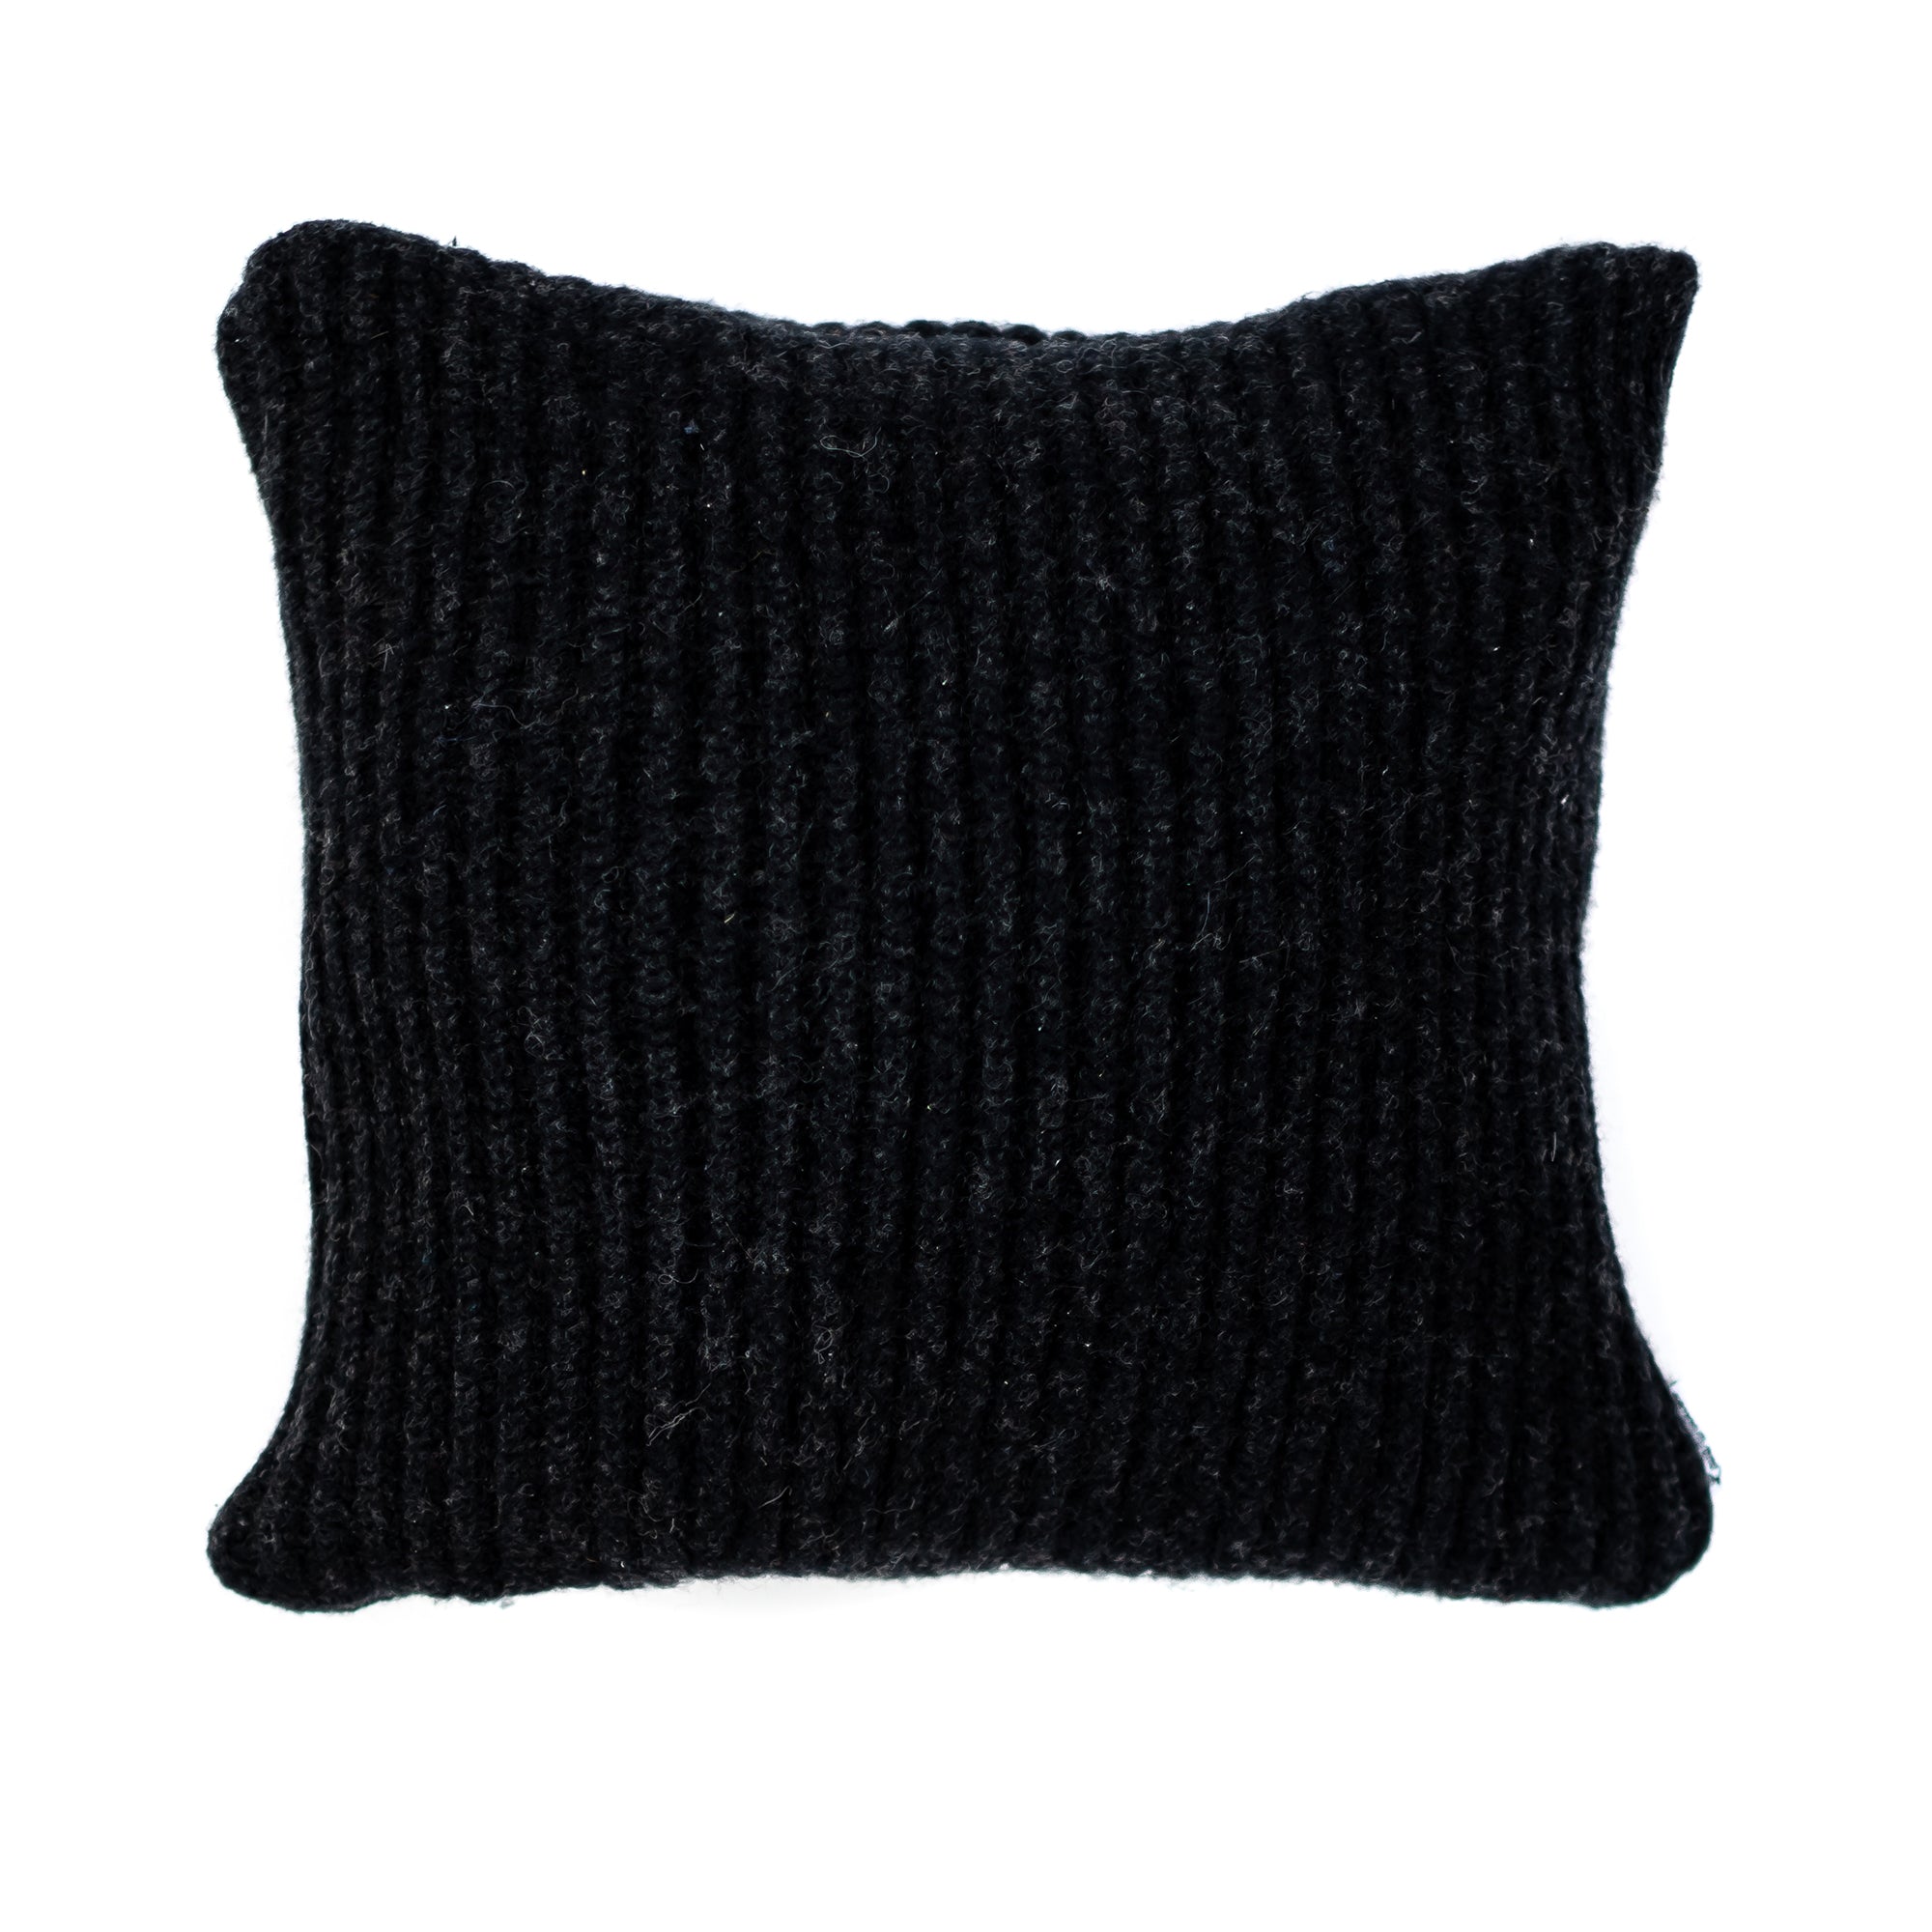 10x10 Wool Black Pillow Cover